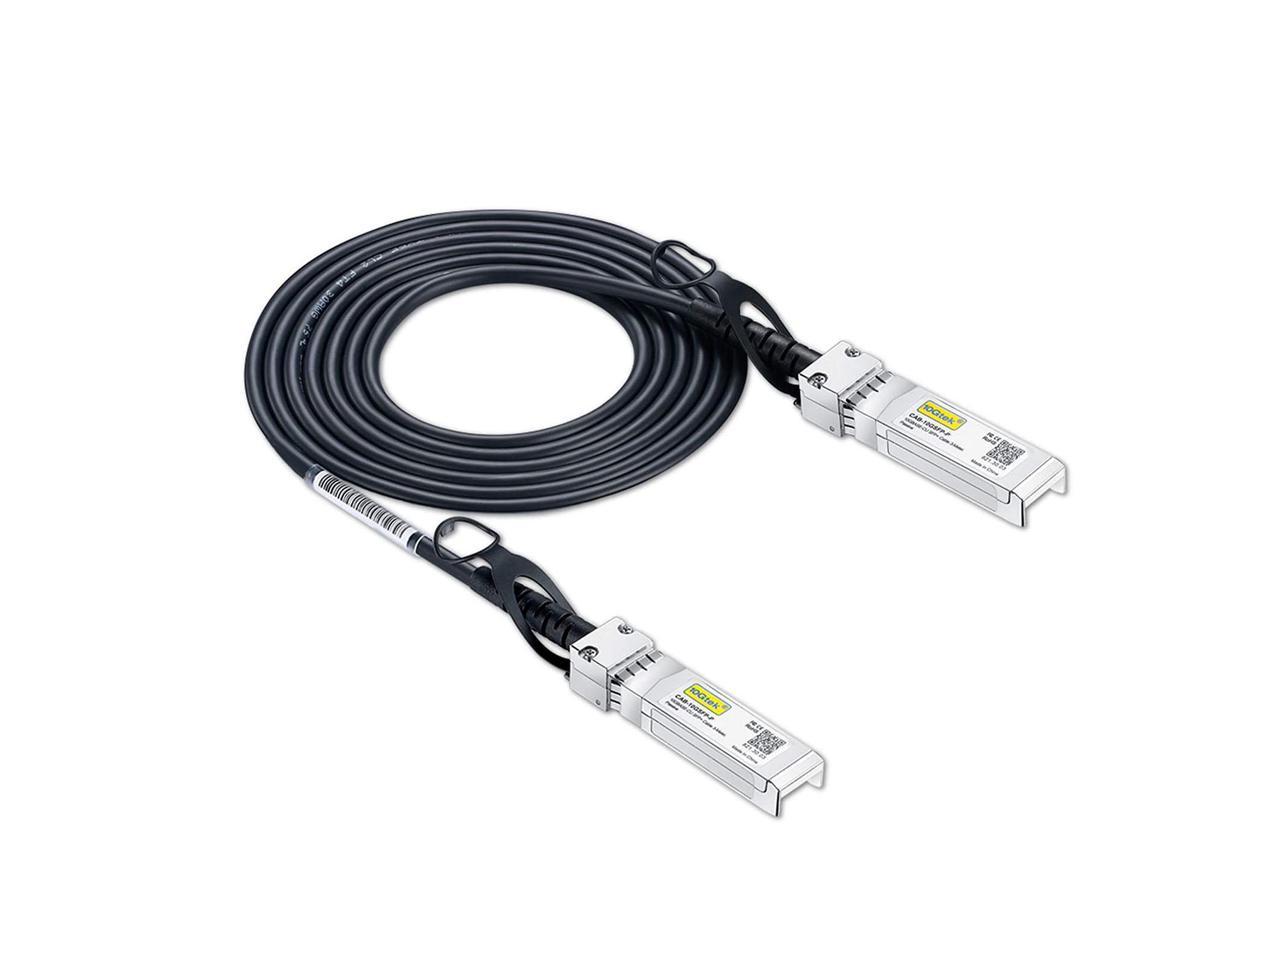 Supermicro 5m Open Switch Devices 40GBASE-CR4 Passive Direct Attach Copper Twinax QSFP Cable for Cisco QSFP-H40G-CU5M 40G QSFP+ DAC Cable 